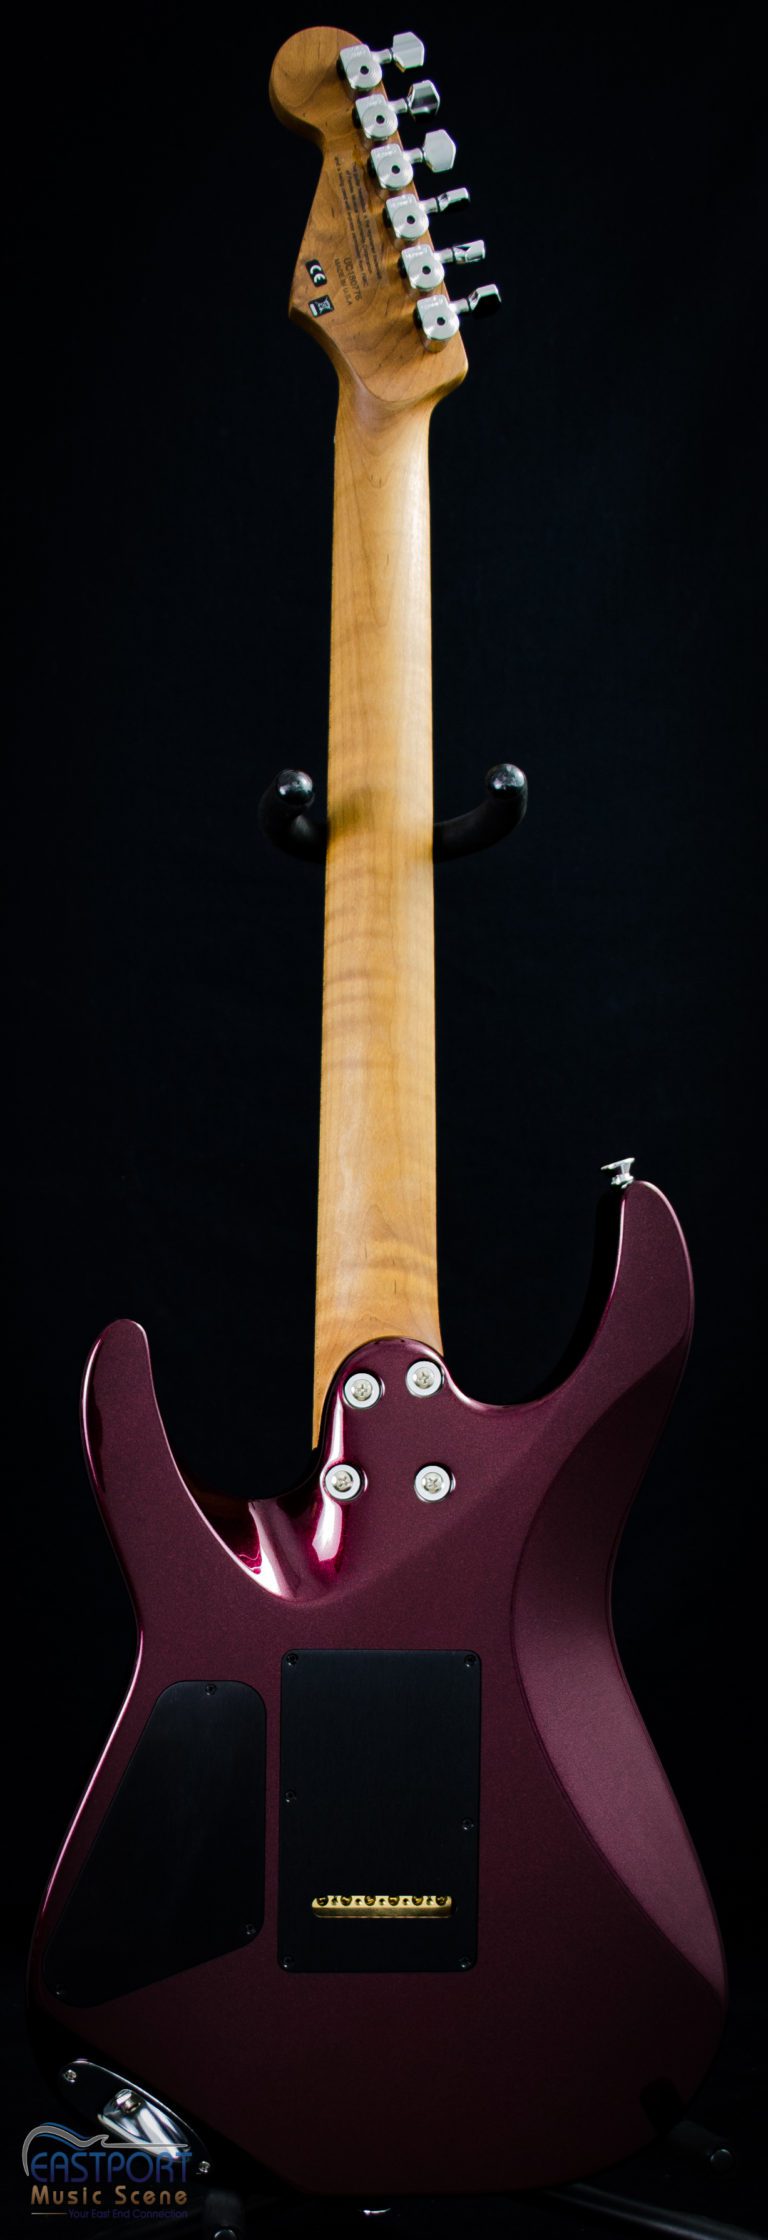 A close up of the neck and back of an electric guitar.